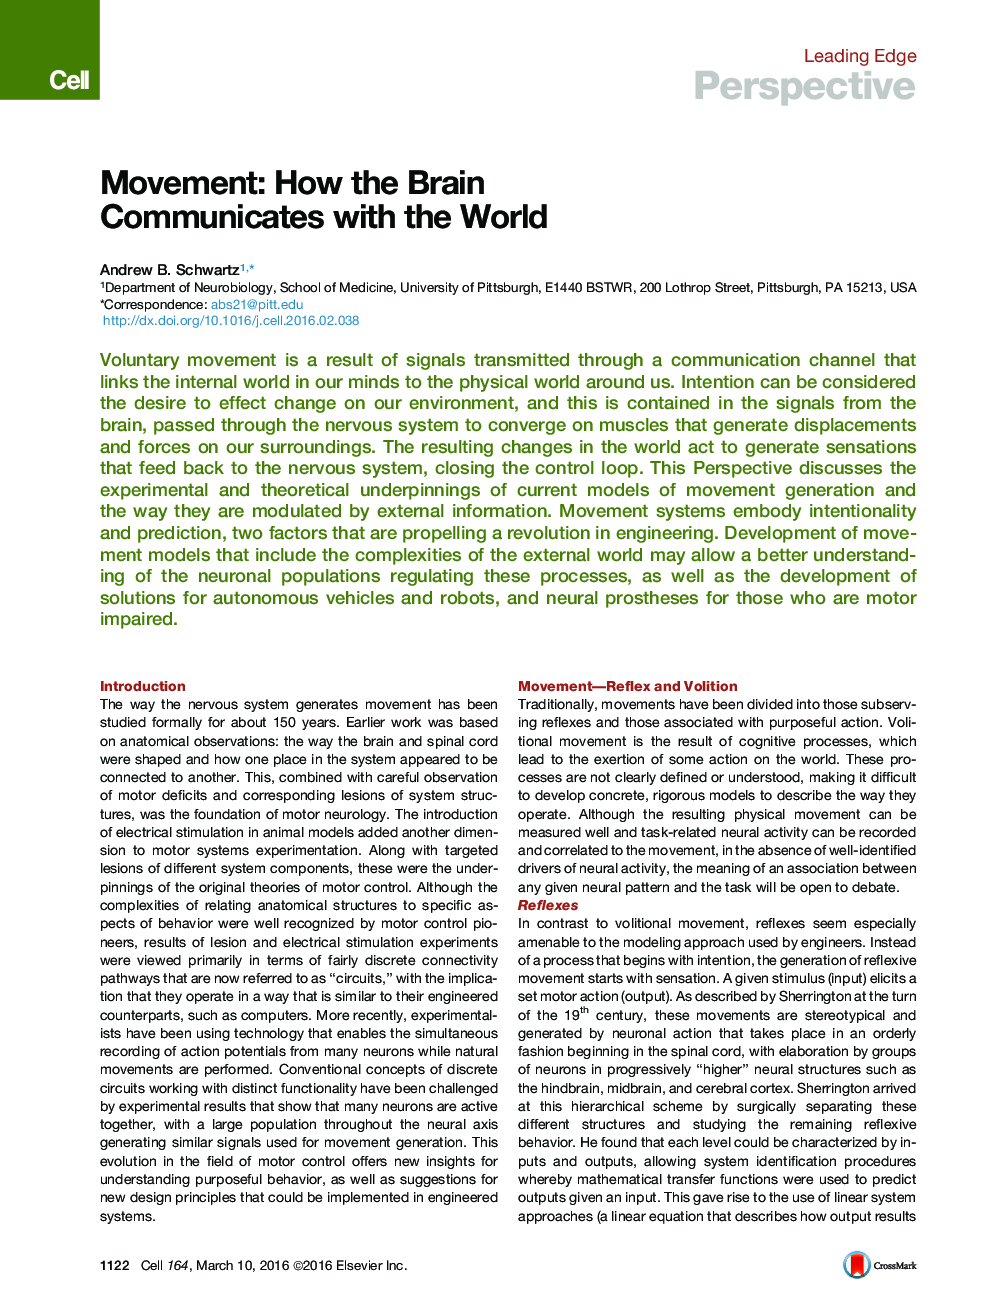 Movement: How the Brain Communicates with the World